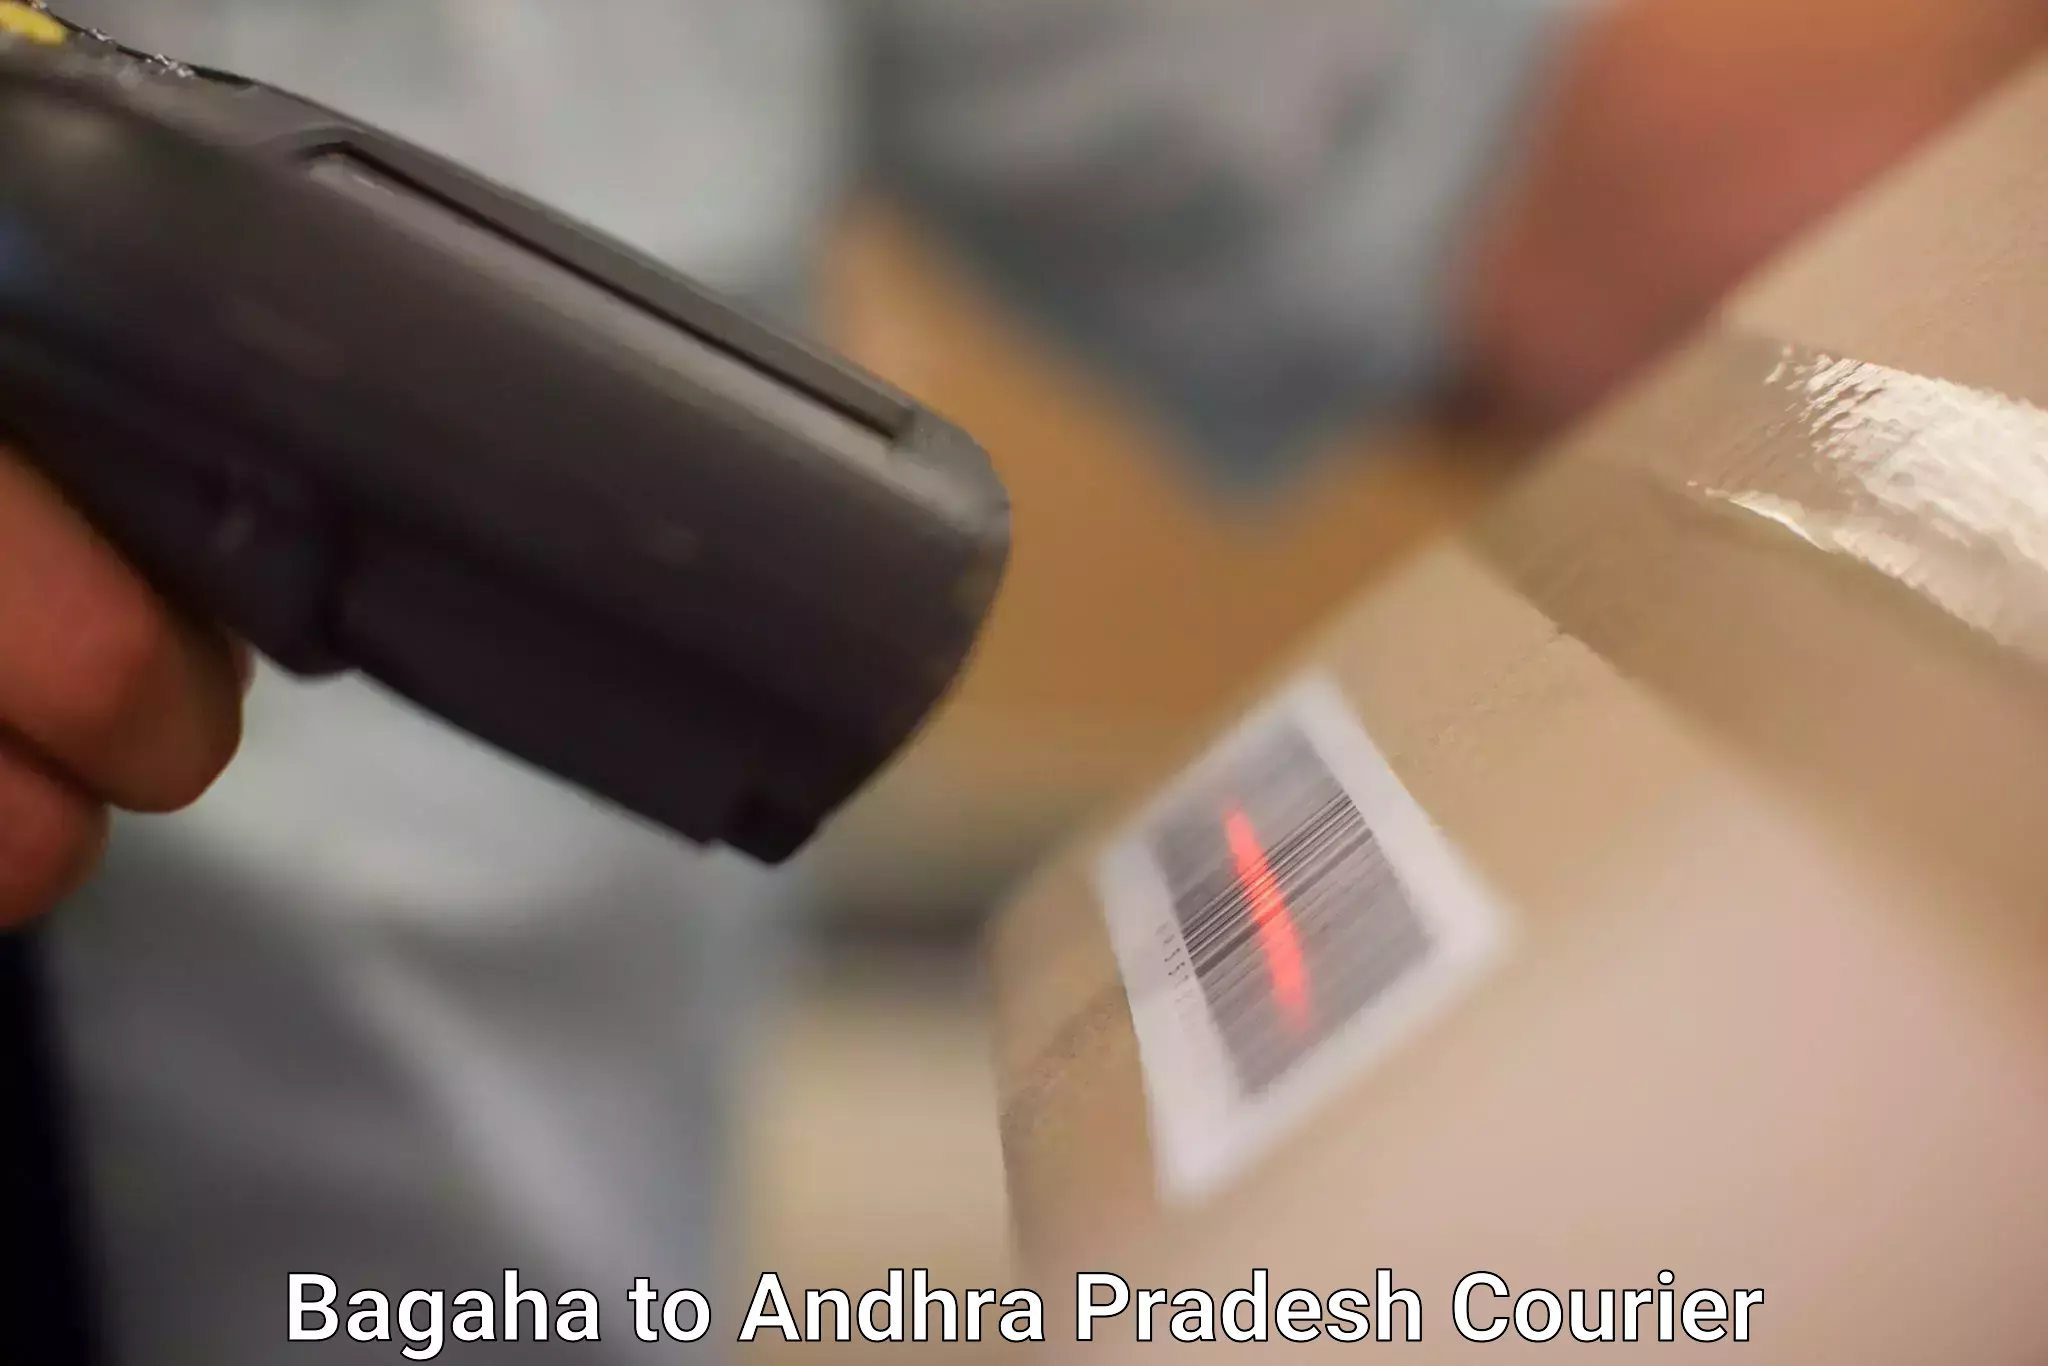 Next day courier Bagaha to Cuddapah